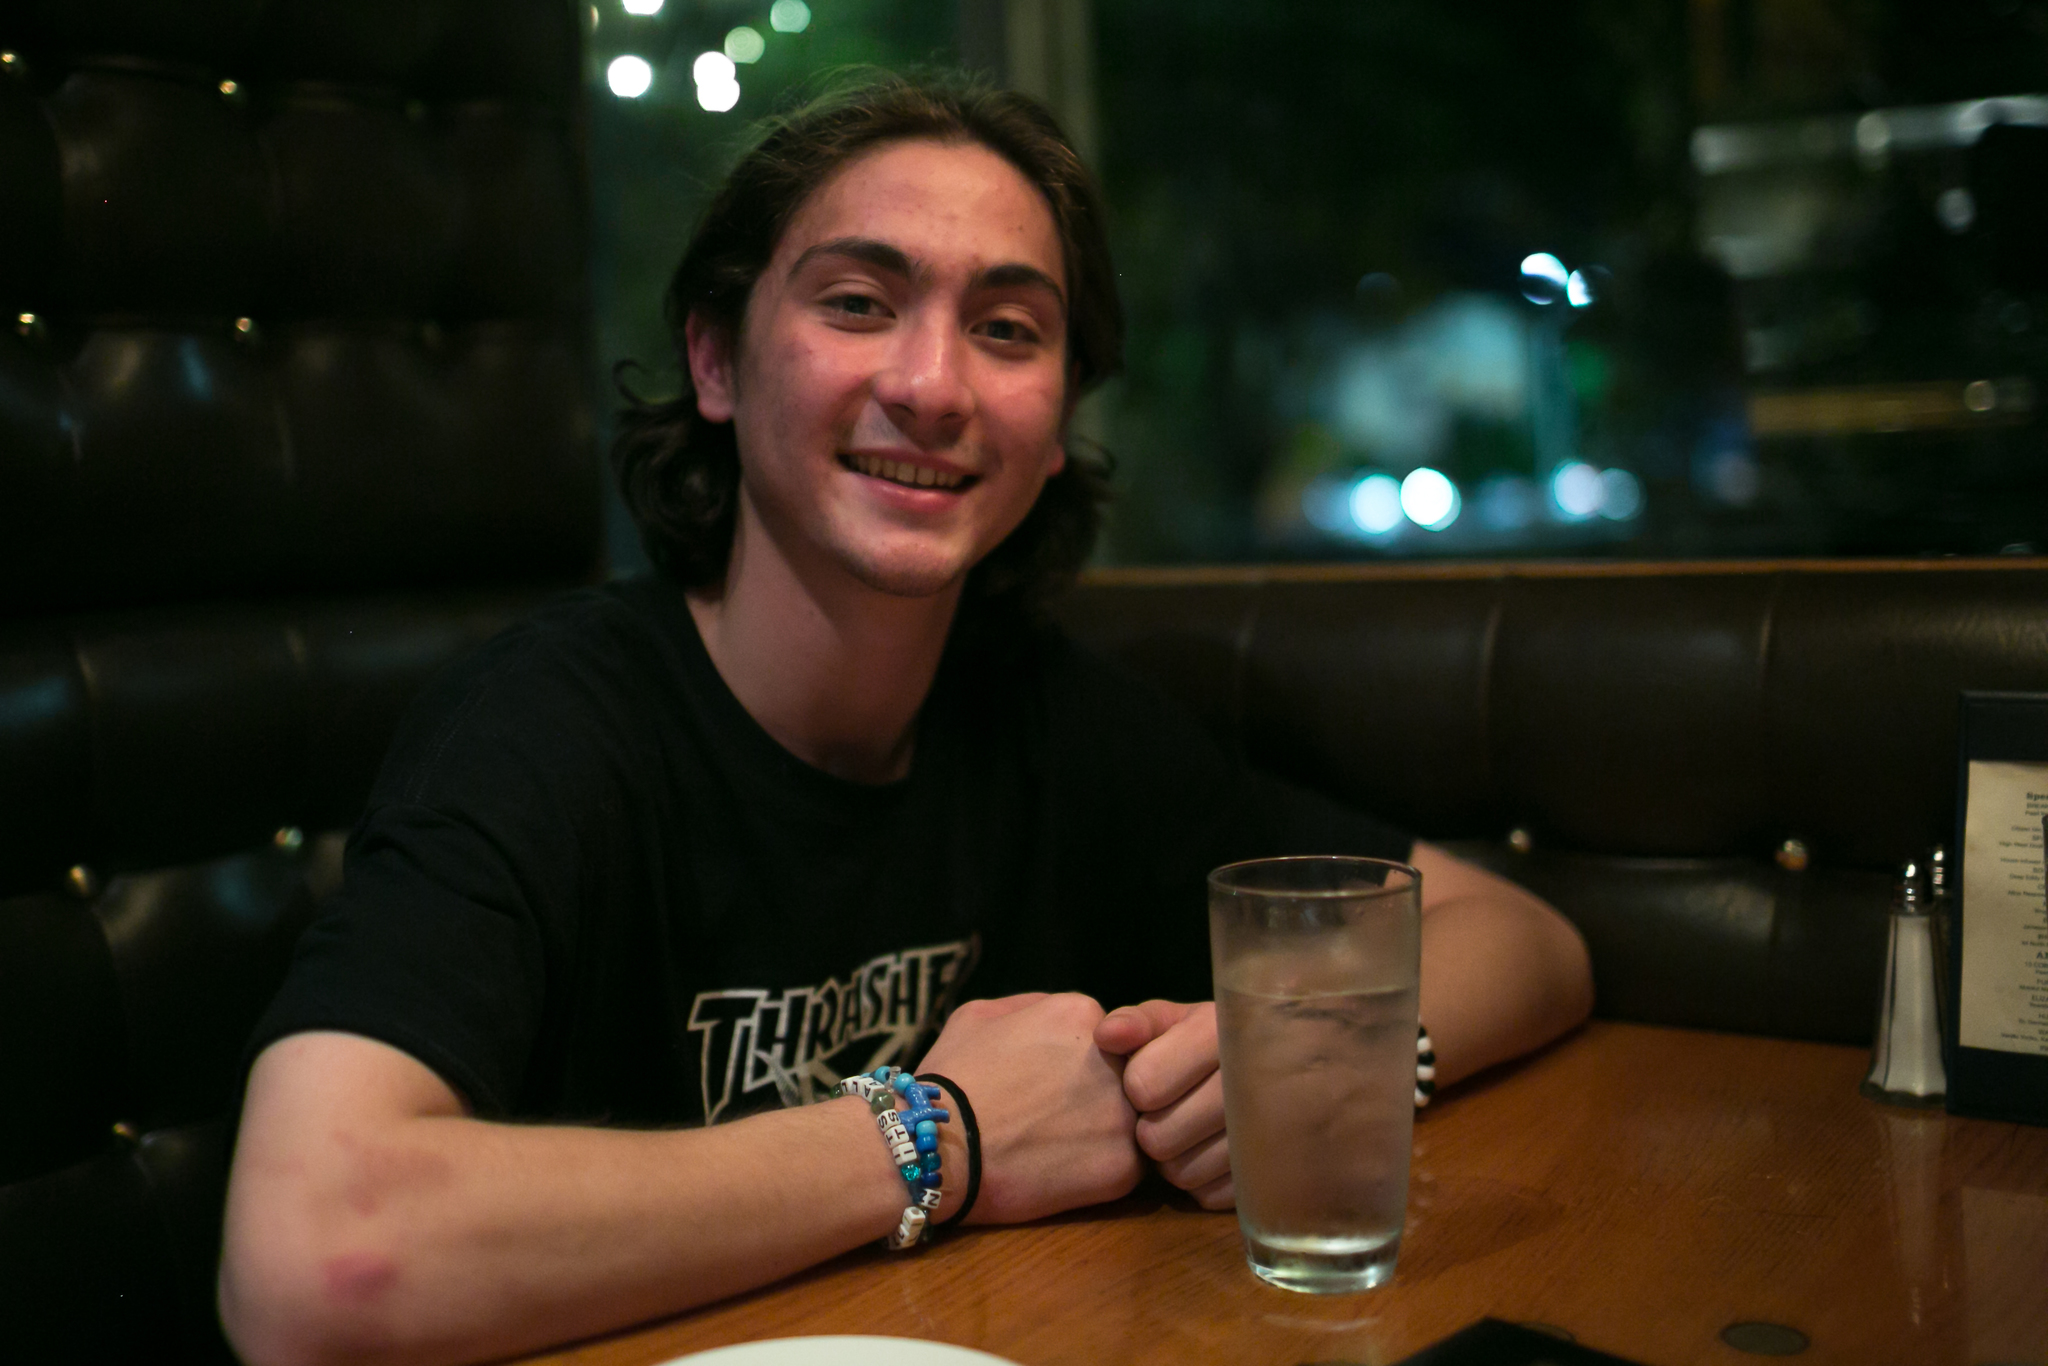 “My dad works down the block for the Seattle Times, so I’ve been coming here for a while. This is the best place to eat after 12, the eggs benedict is really good. They don’t care how turnt you are, as long as you’re not asleep.” -Joel Watanabe, 2:22 a.m.